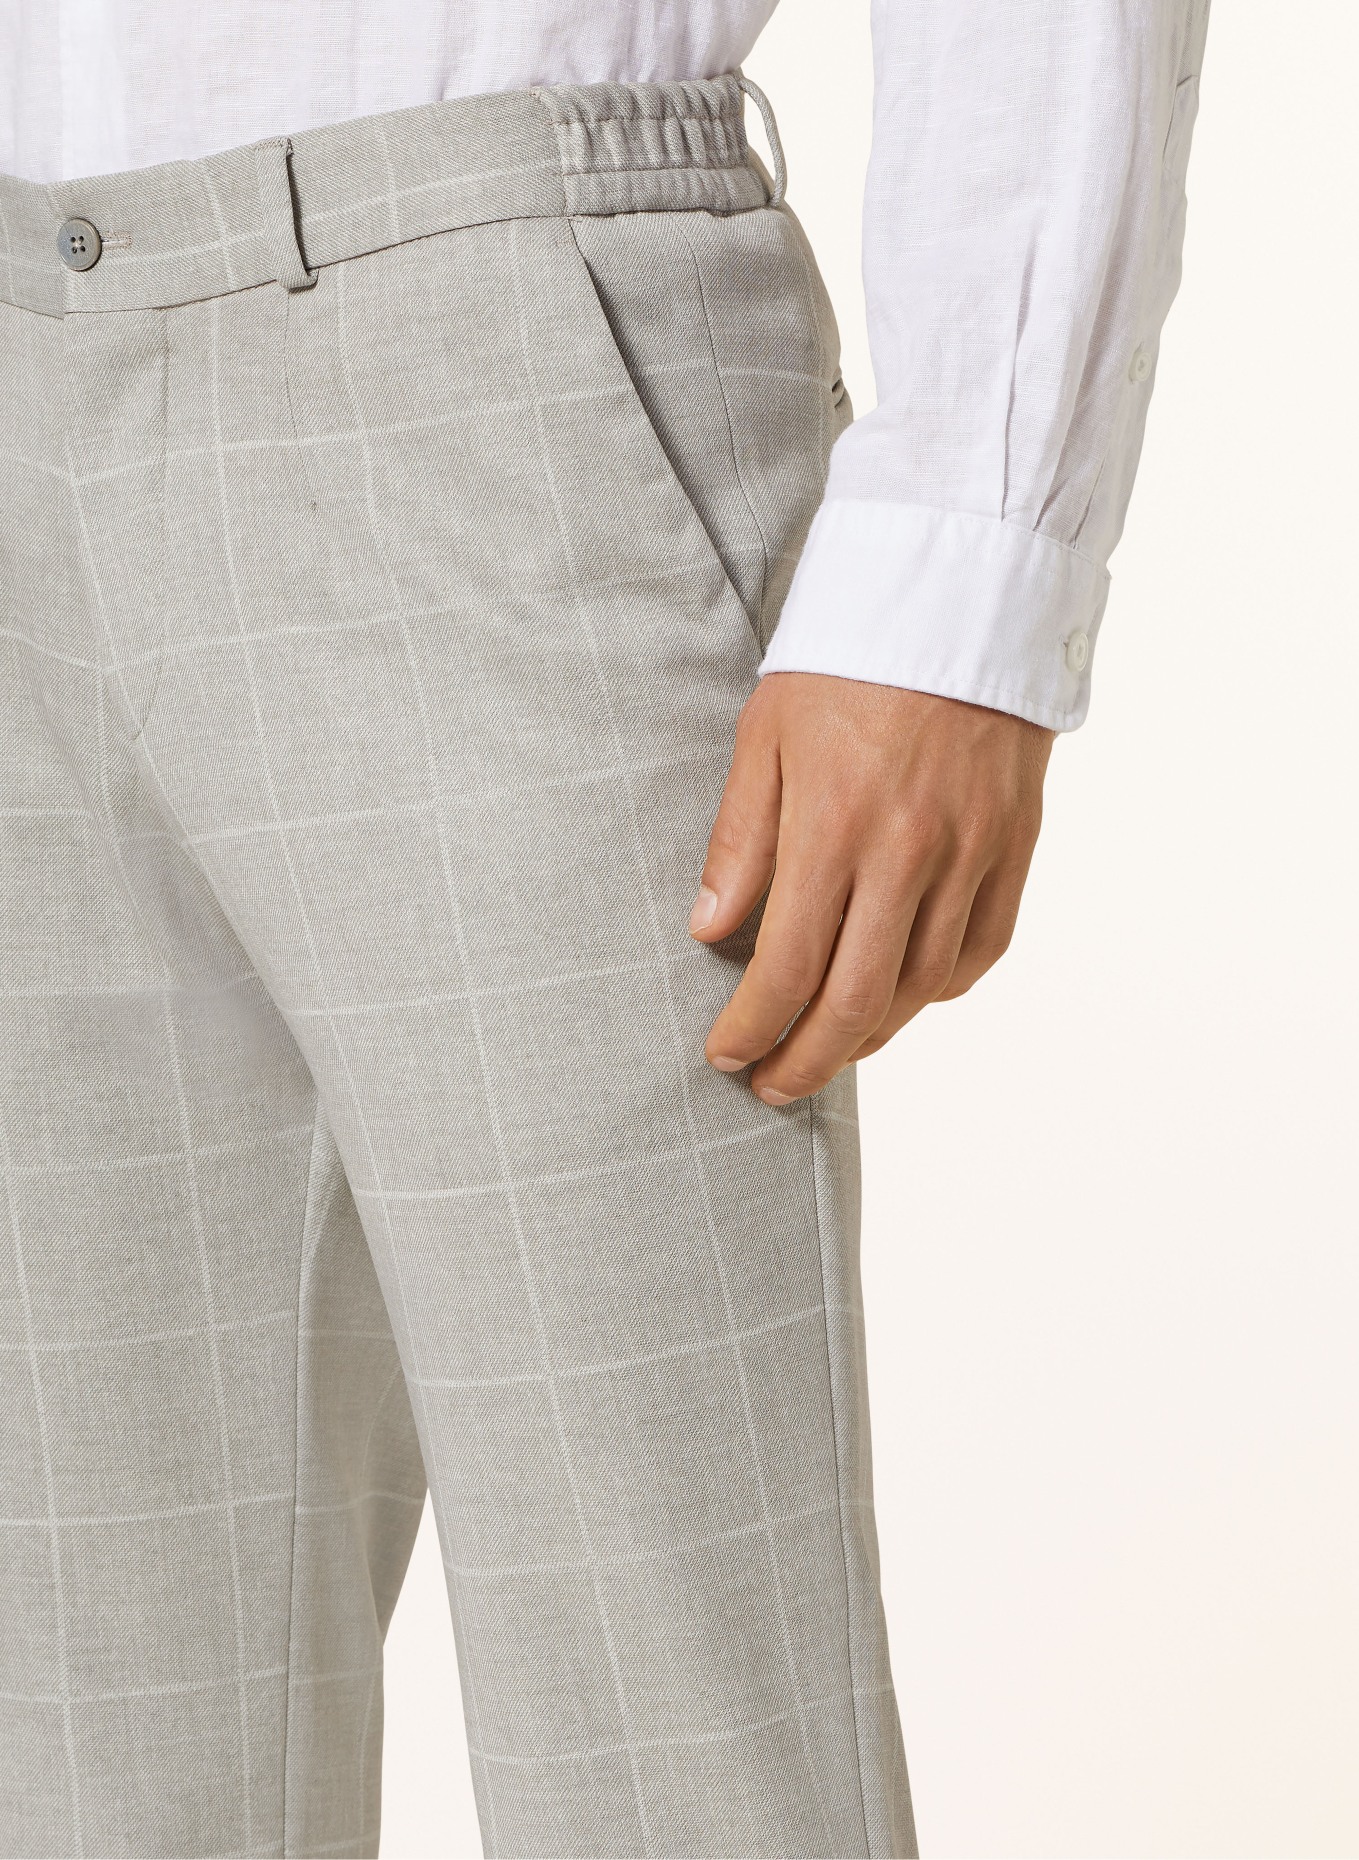 PAUL Suit trousers extra slim fit made of jersey, Color: 220 SAND (Image 6)